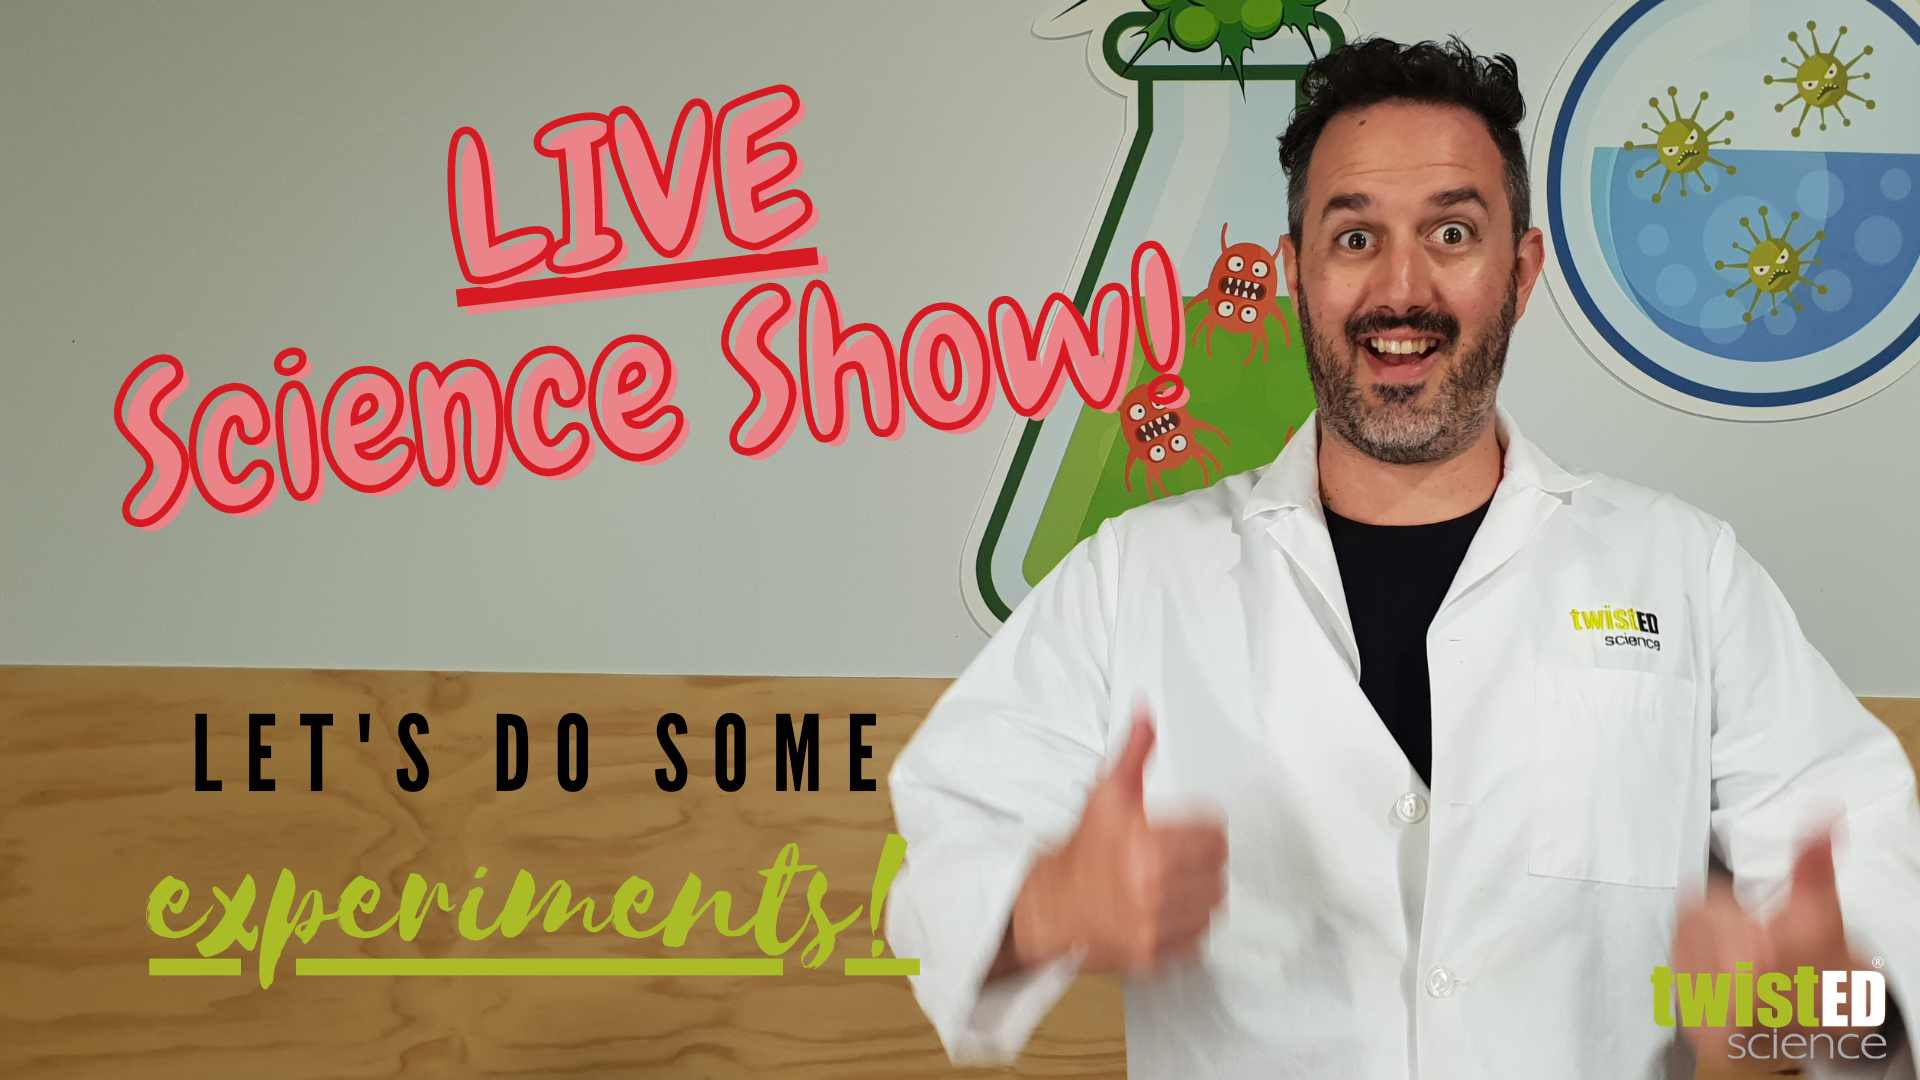 LIVE Science Show!